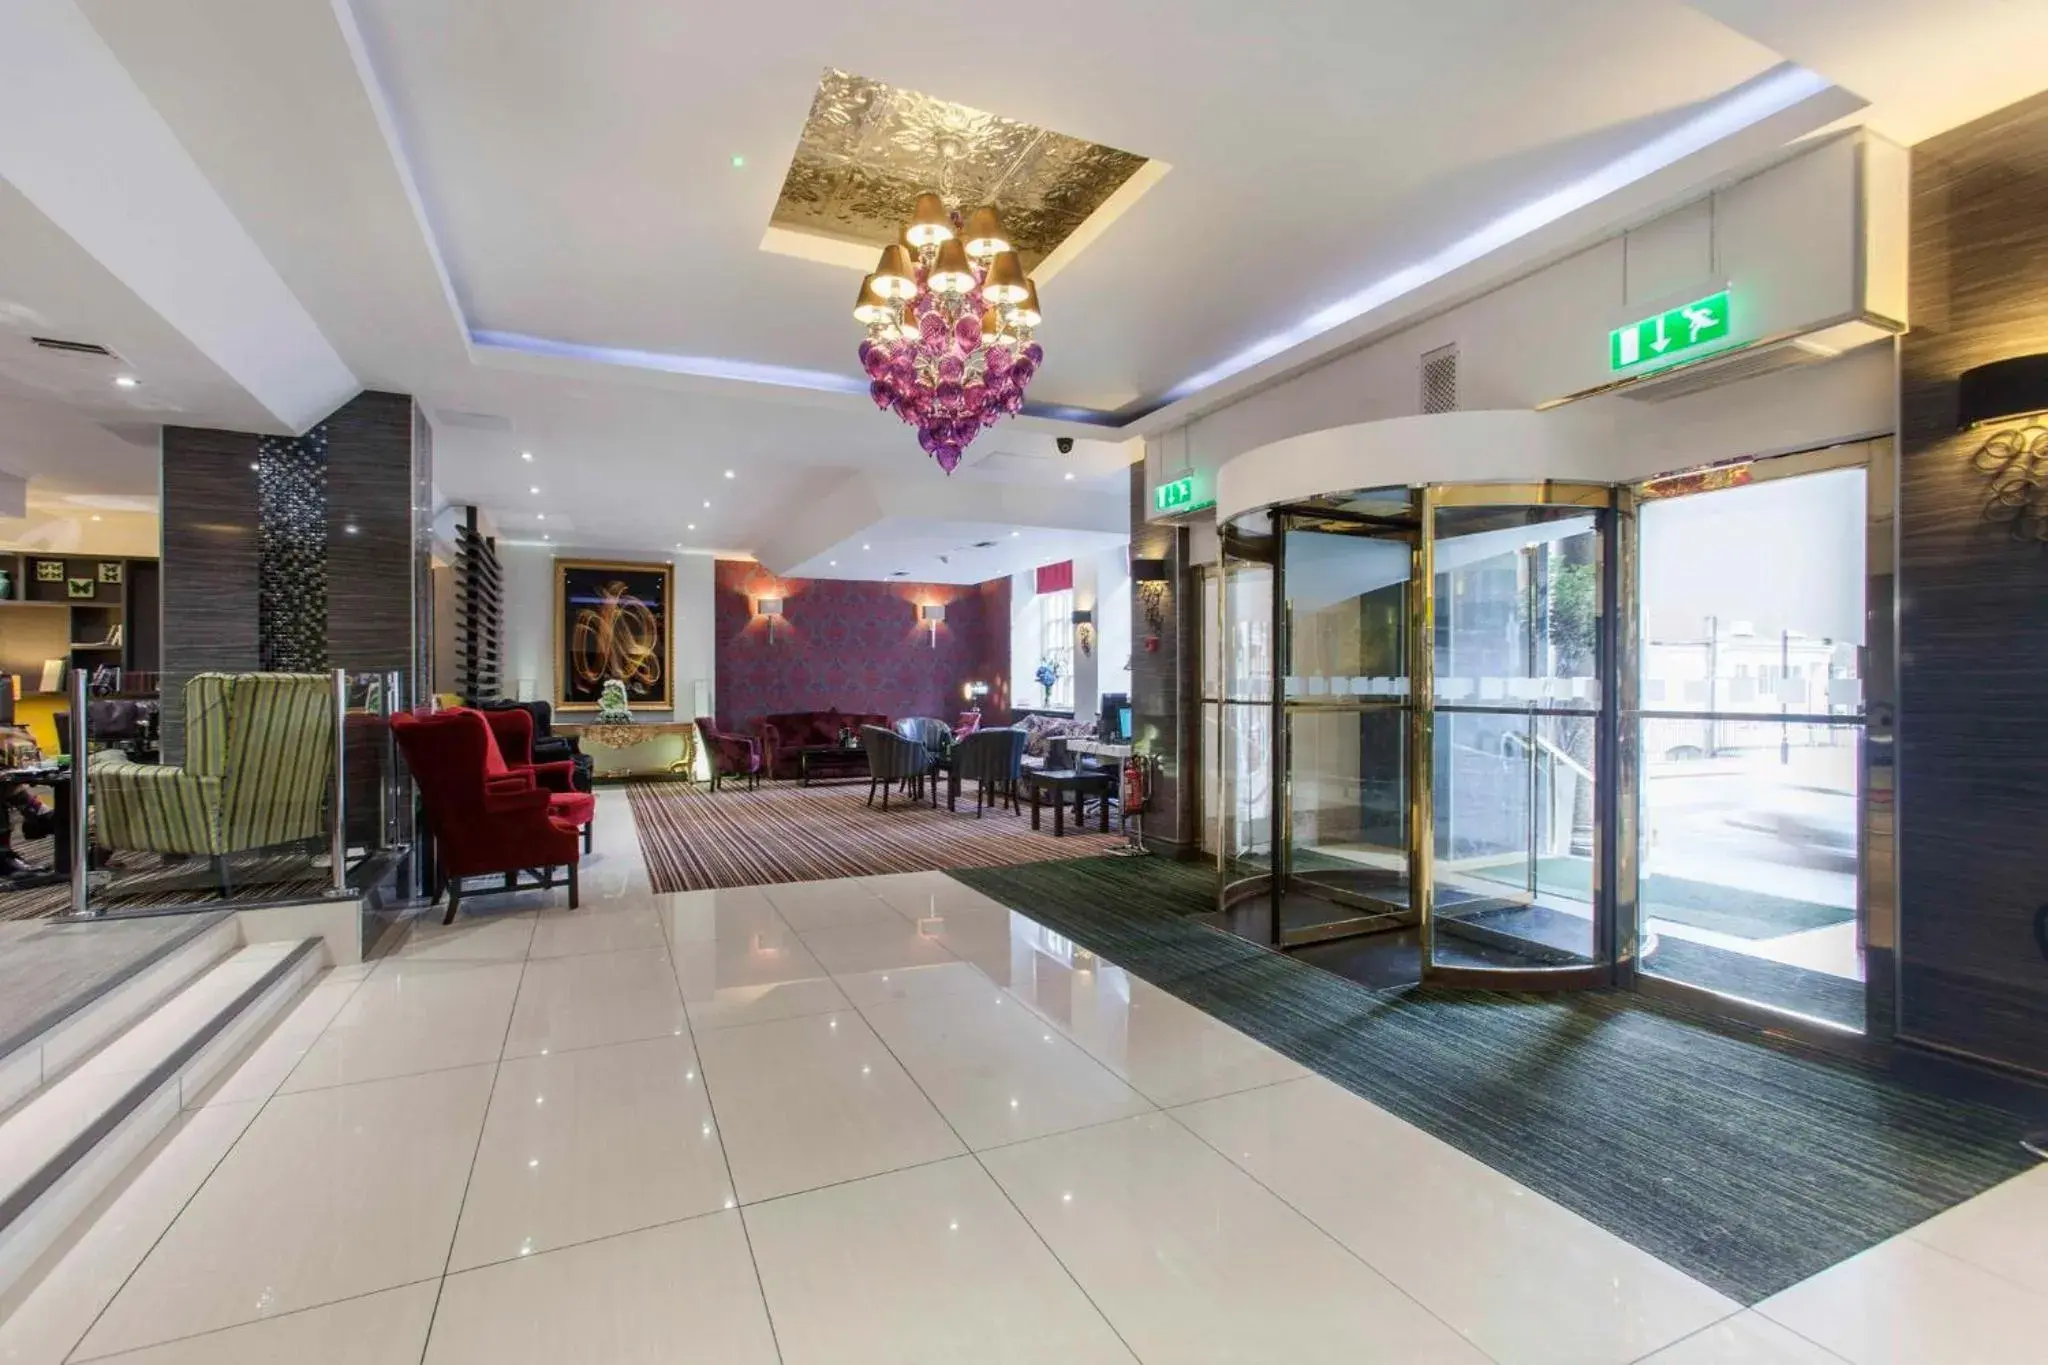 Property building, Lobby/Reception in Holiday Inn London Oxford Circus, an IHG Hotel